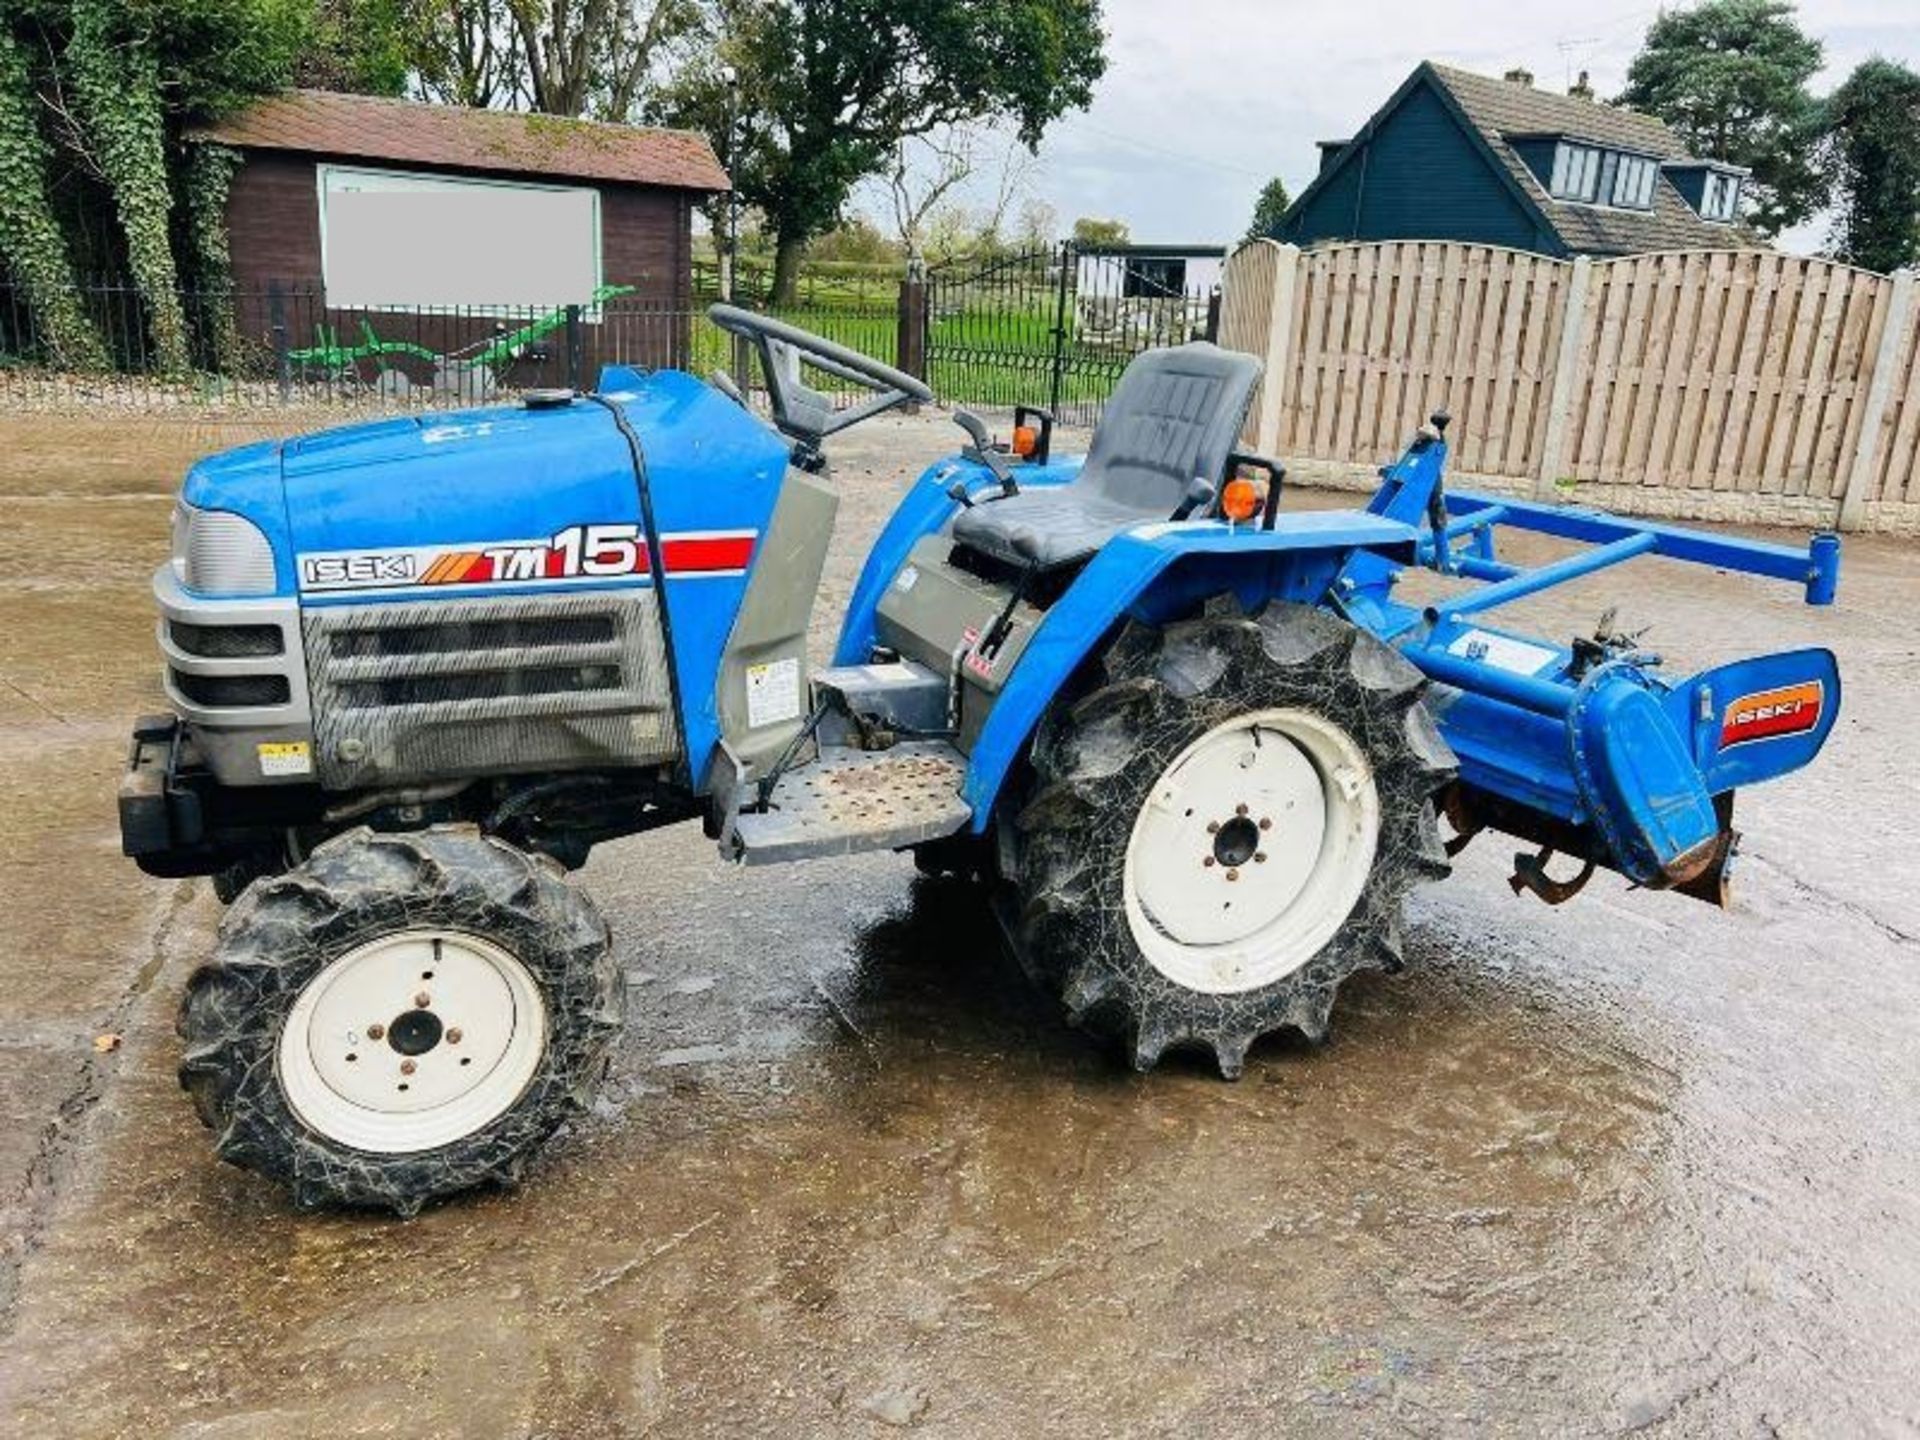 ISEKI TM15 4WD COMPACT TRACTOR C/W REAR ROTAVATOR - Image 7 of 12